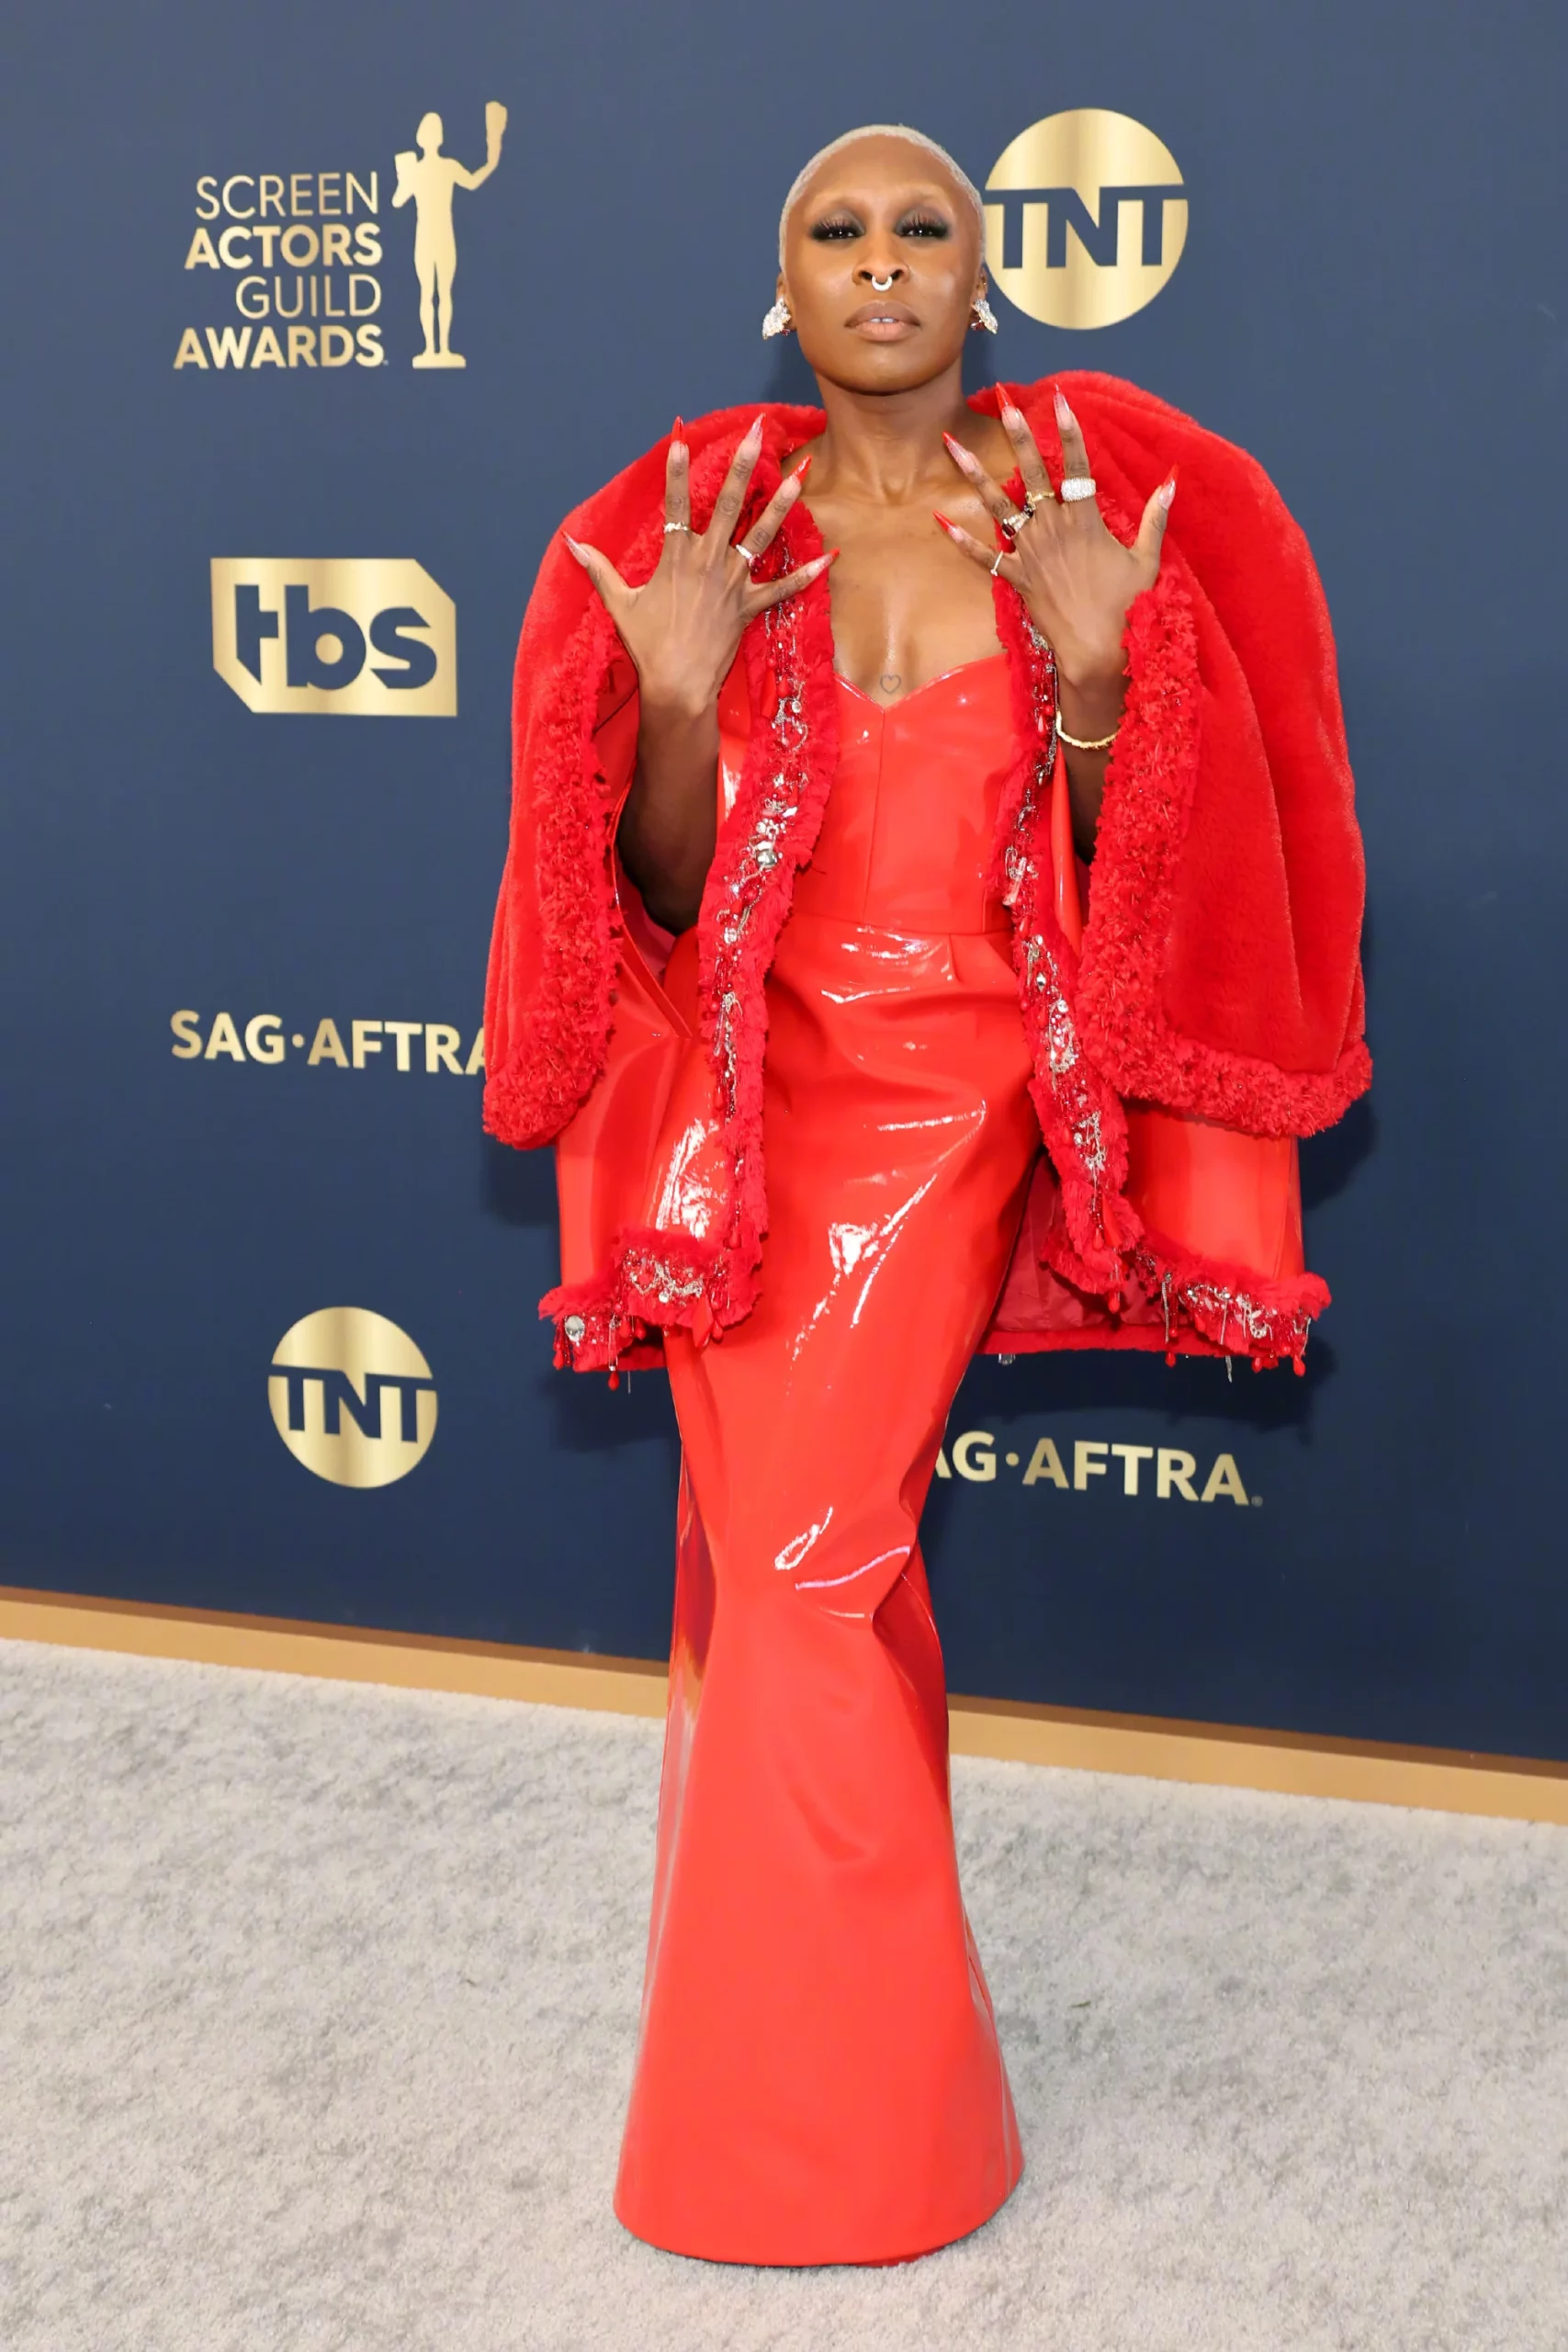 28th Screen Actors Guild Awards, Cynthia Erivo attended ​​​